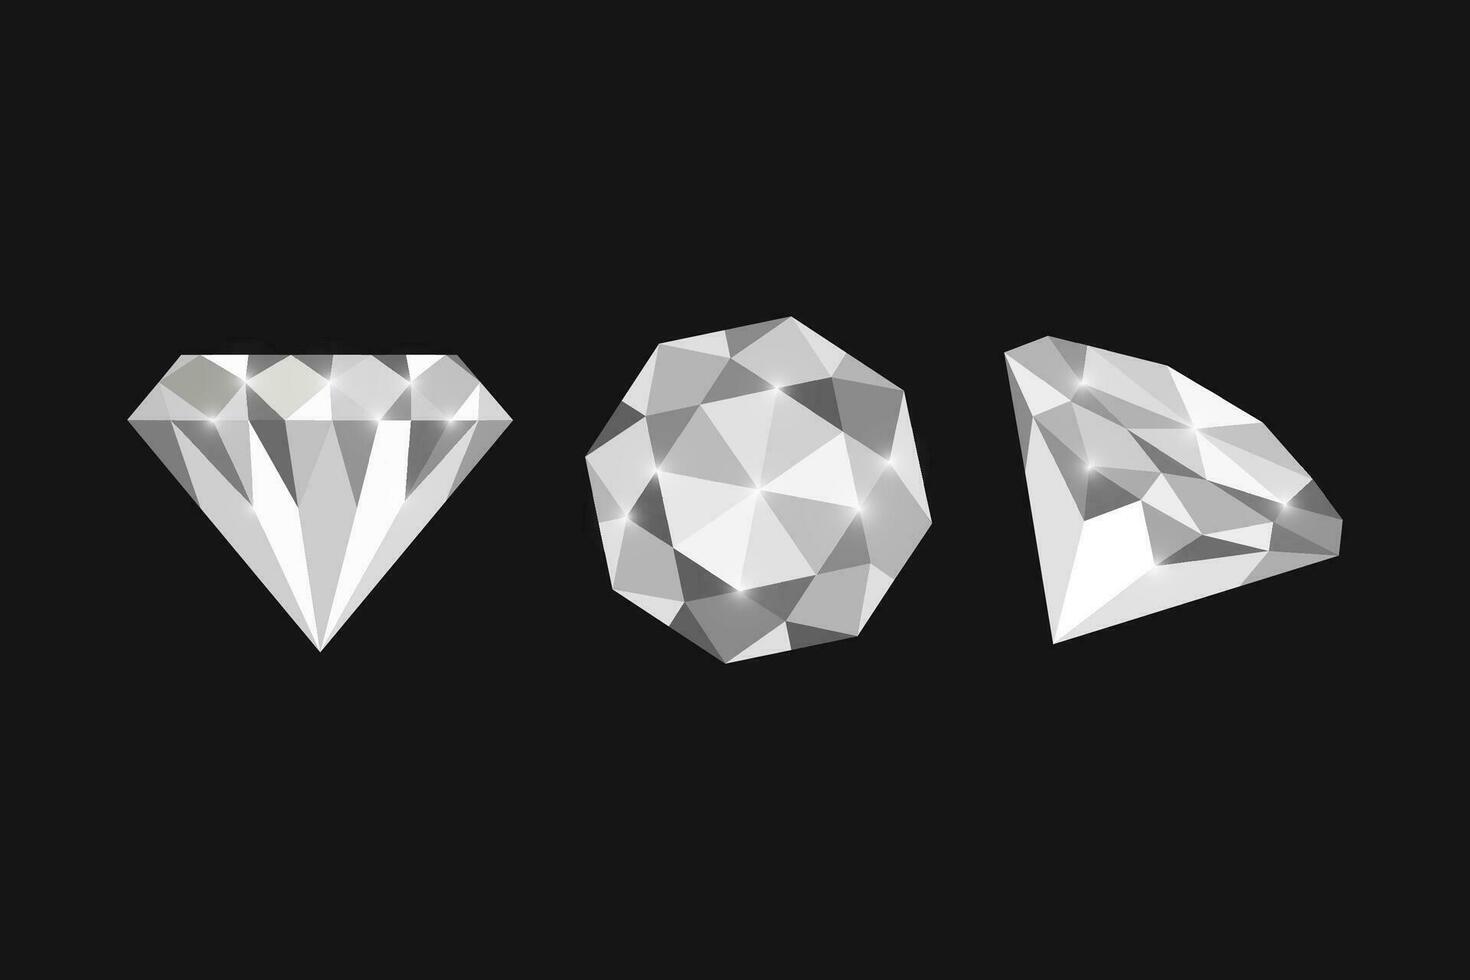 Diamonds from different angles. Isolated on black background. Vector design.